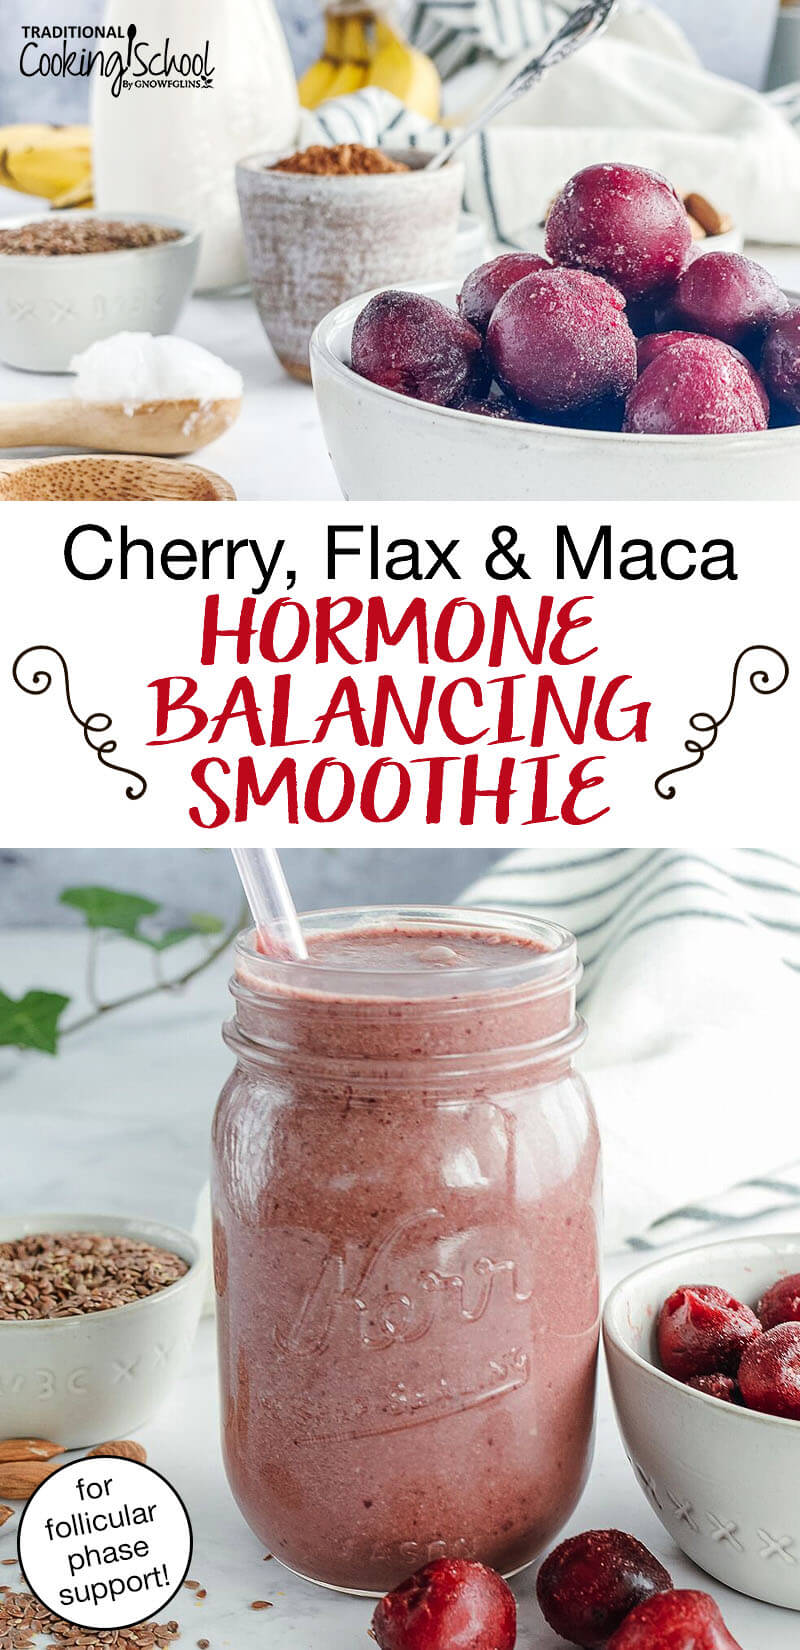 photo collage of a pink smoothie and array of ingredients, including frozen cherries, with text overlay: "Cherry, Flax & Maca Hormone Balancing Smoothie (for follicular phase support!)"